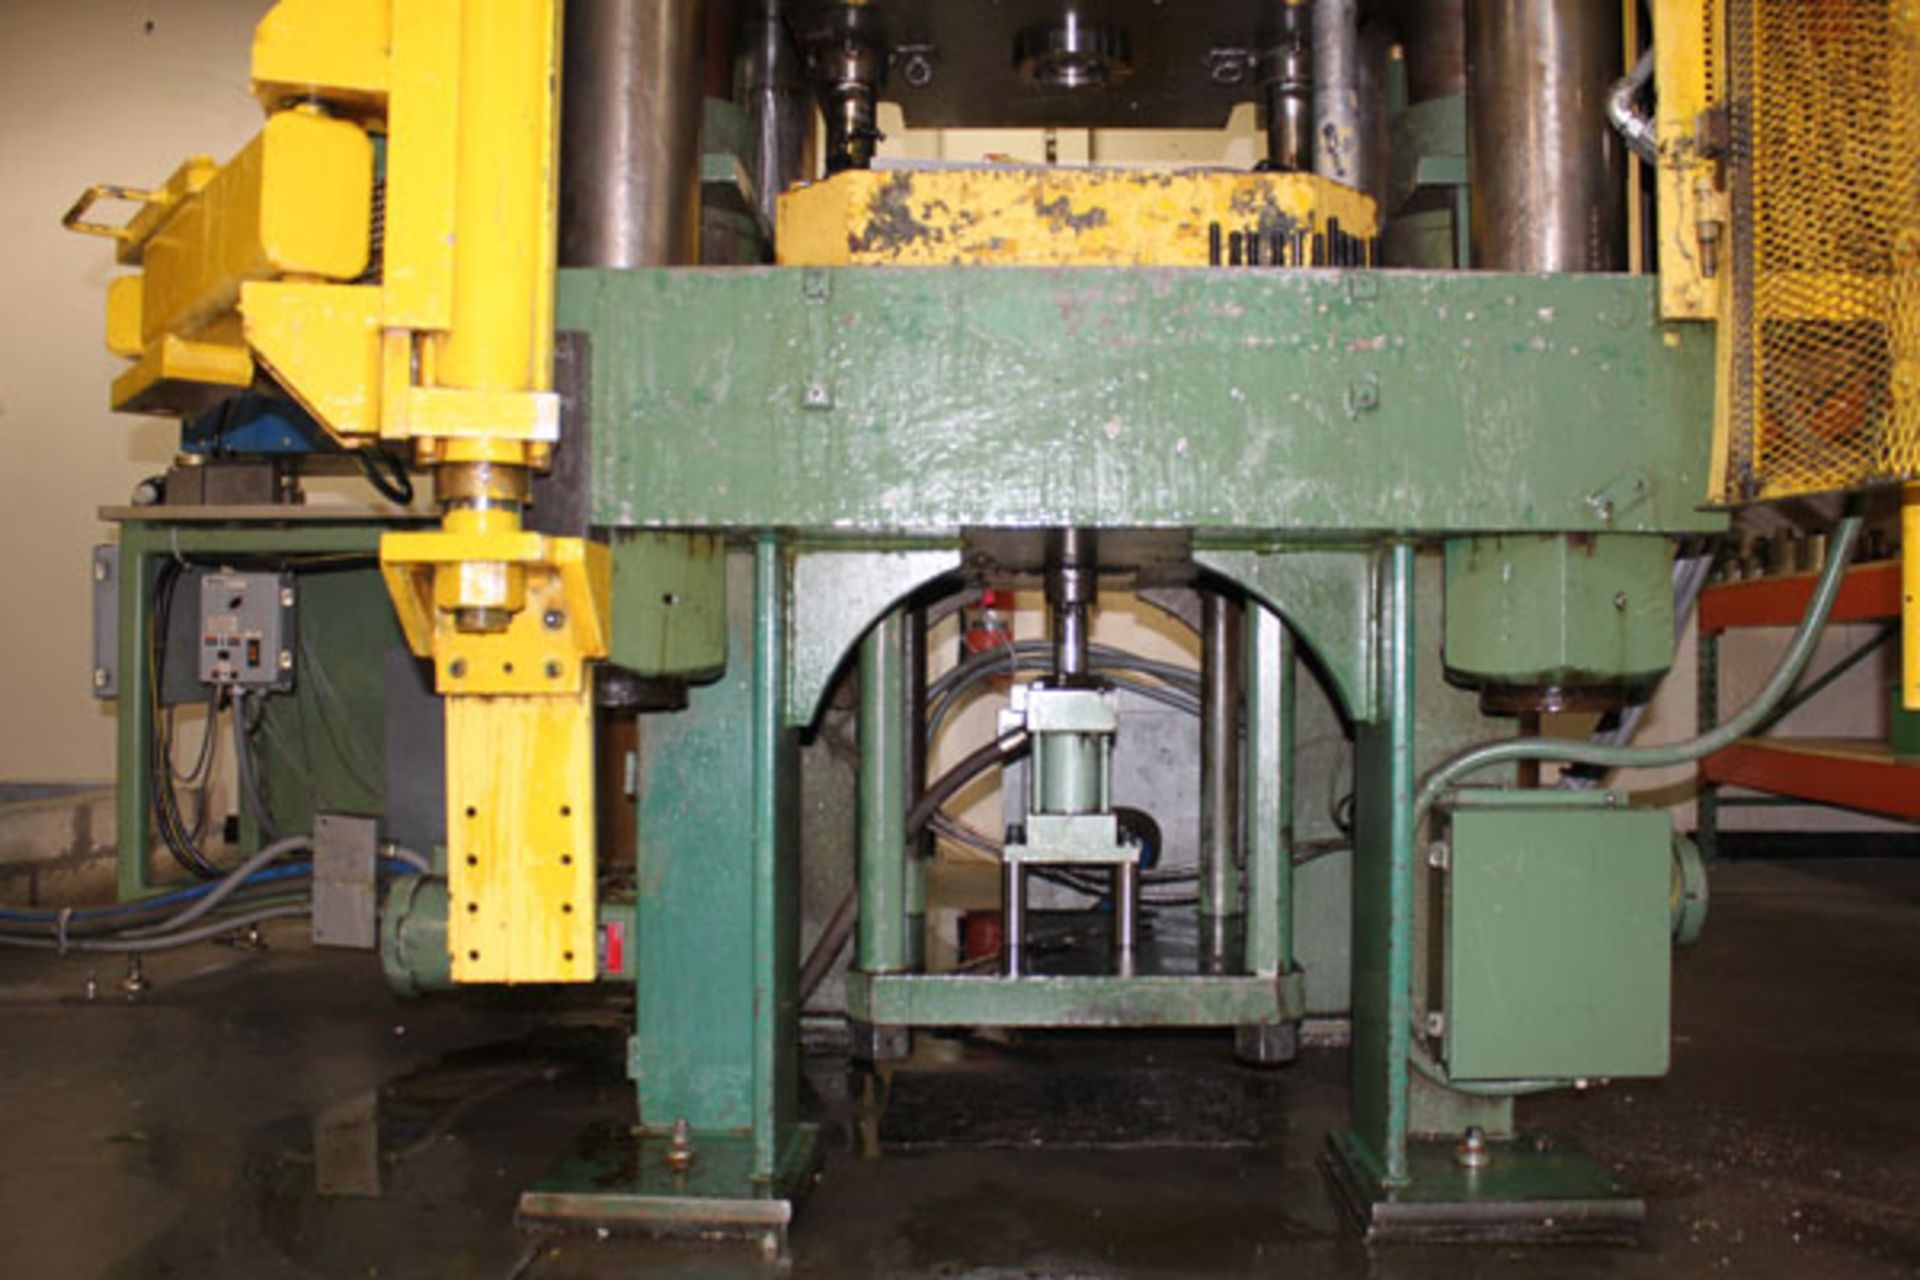 1981 800-Ton Modern Hydraulic 4 Post Press, Mdl. 1R, S/N: 2249, Located in Huntington Park, CA - Image 3 of 14